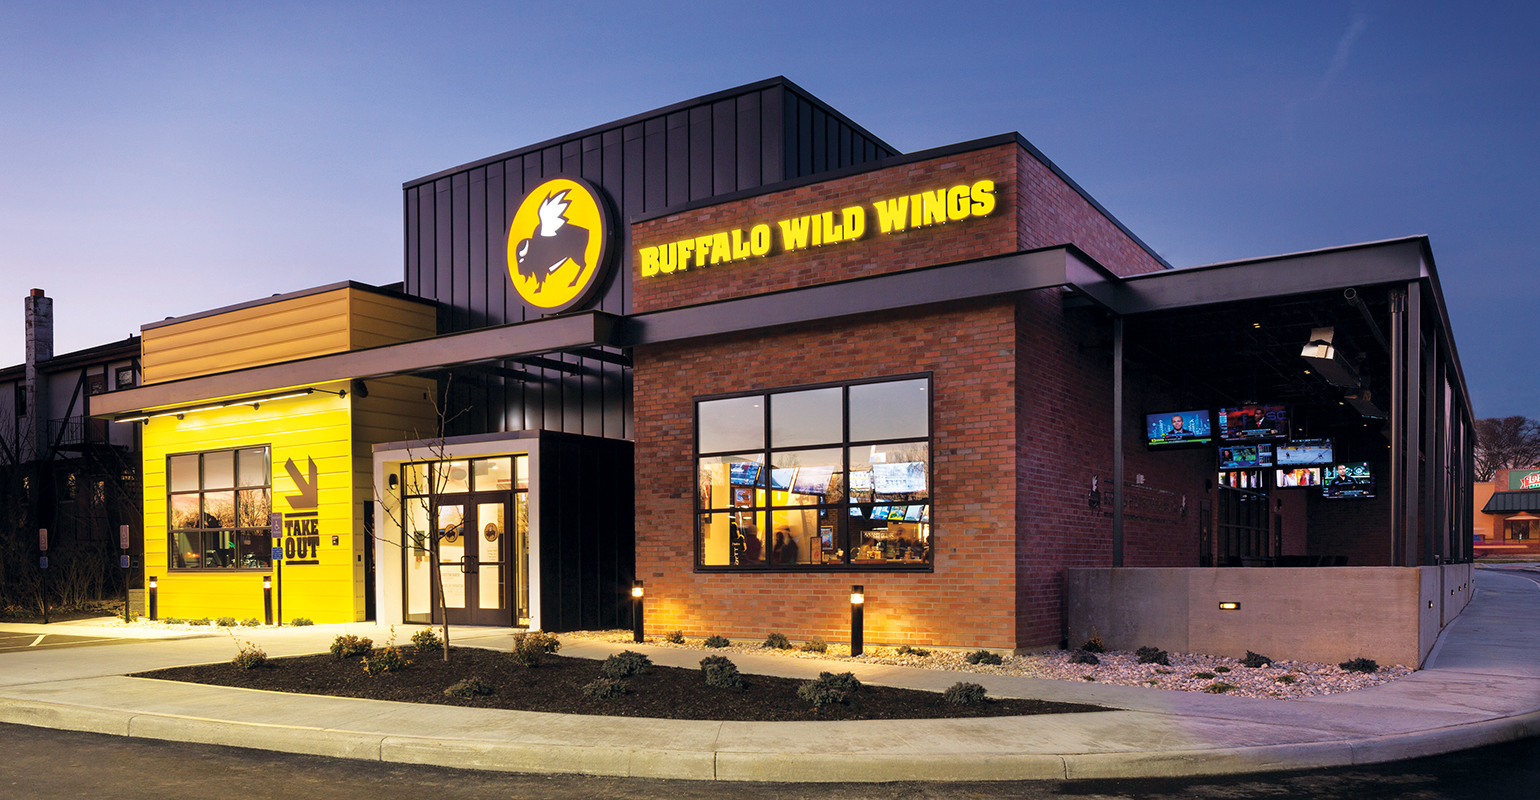 Buffalo Wild Wings faces challenging chicken wing costs | Nation's